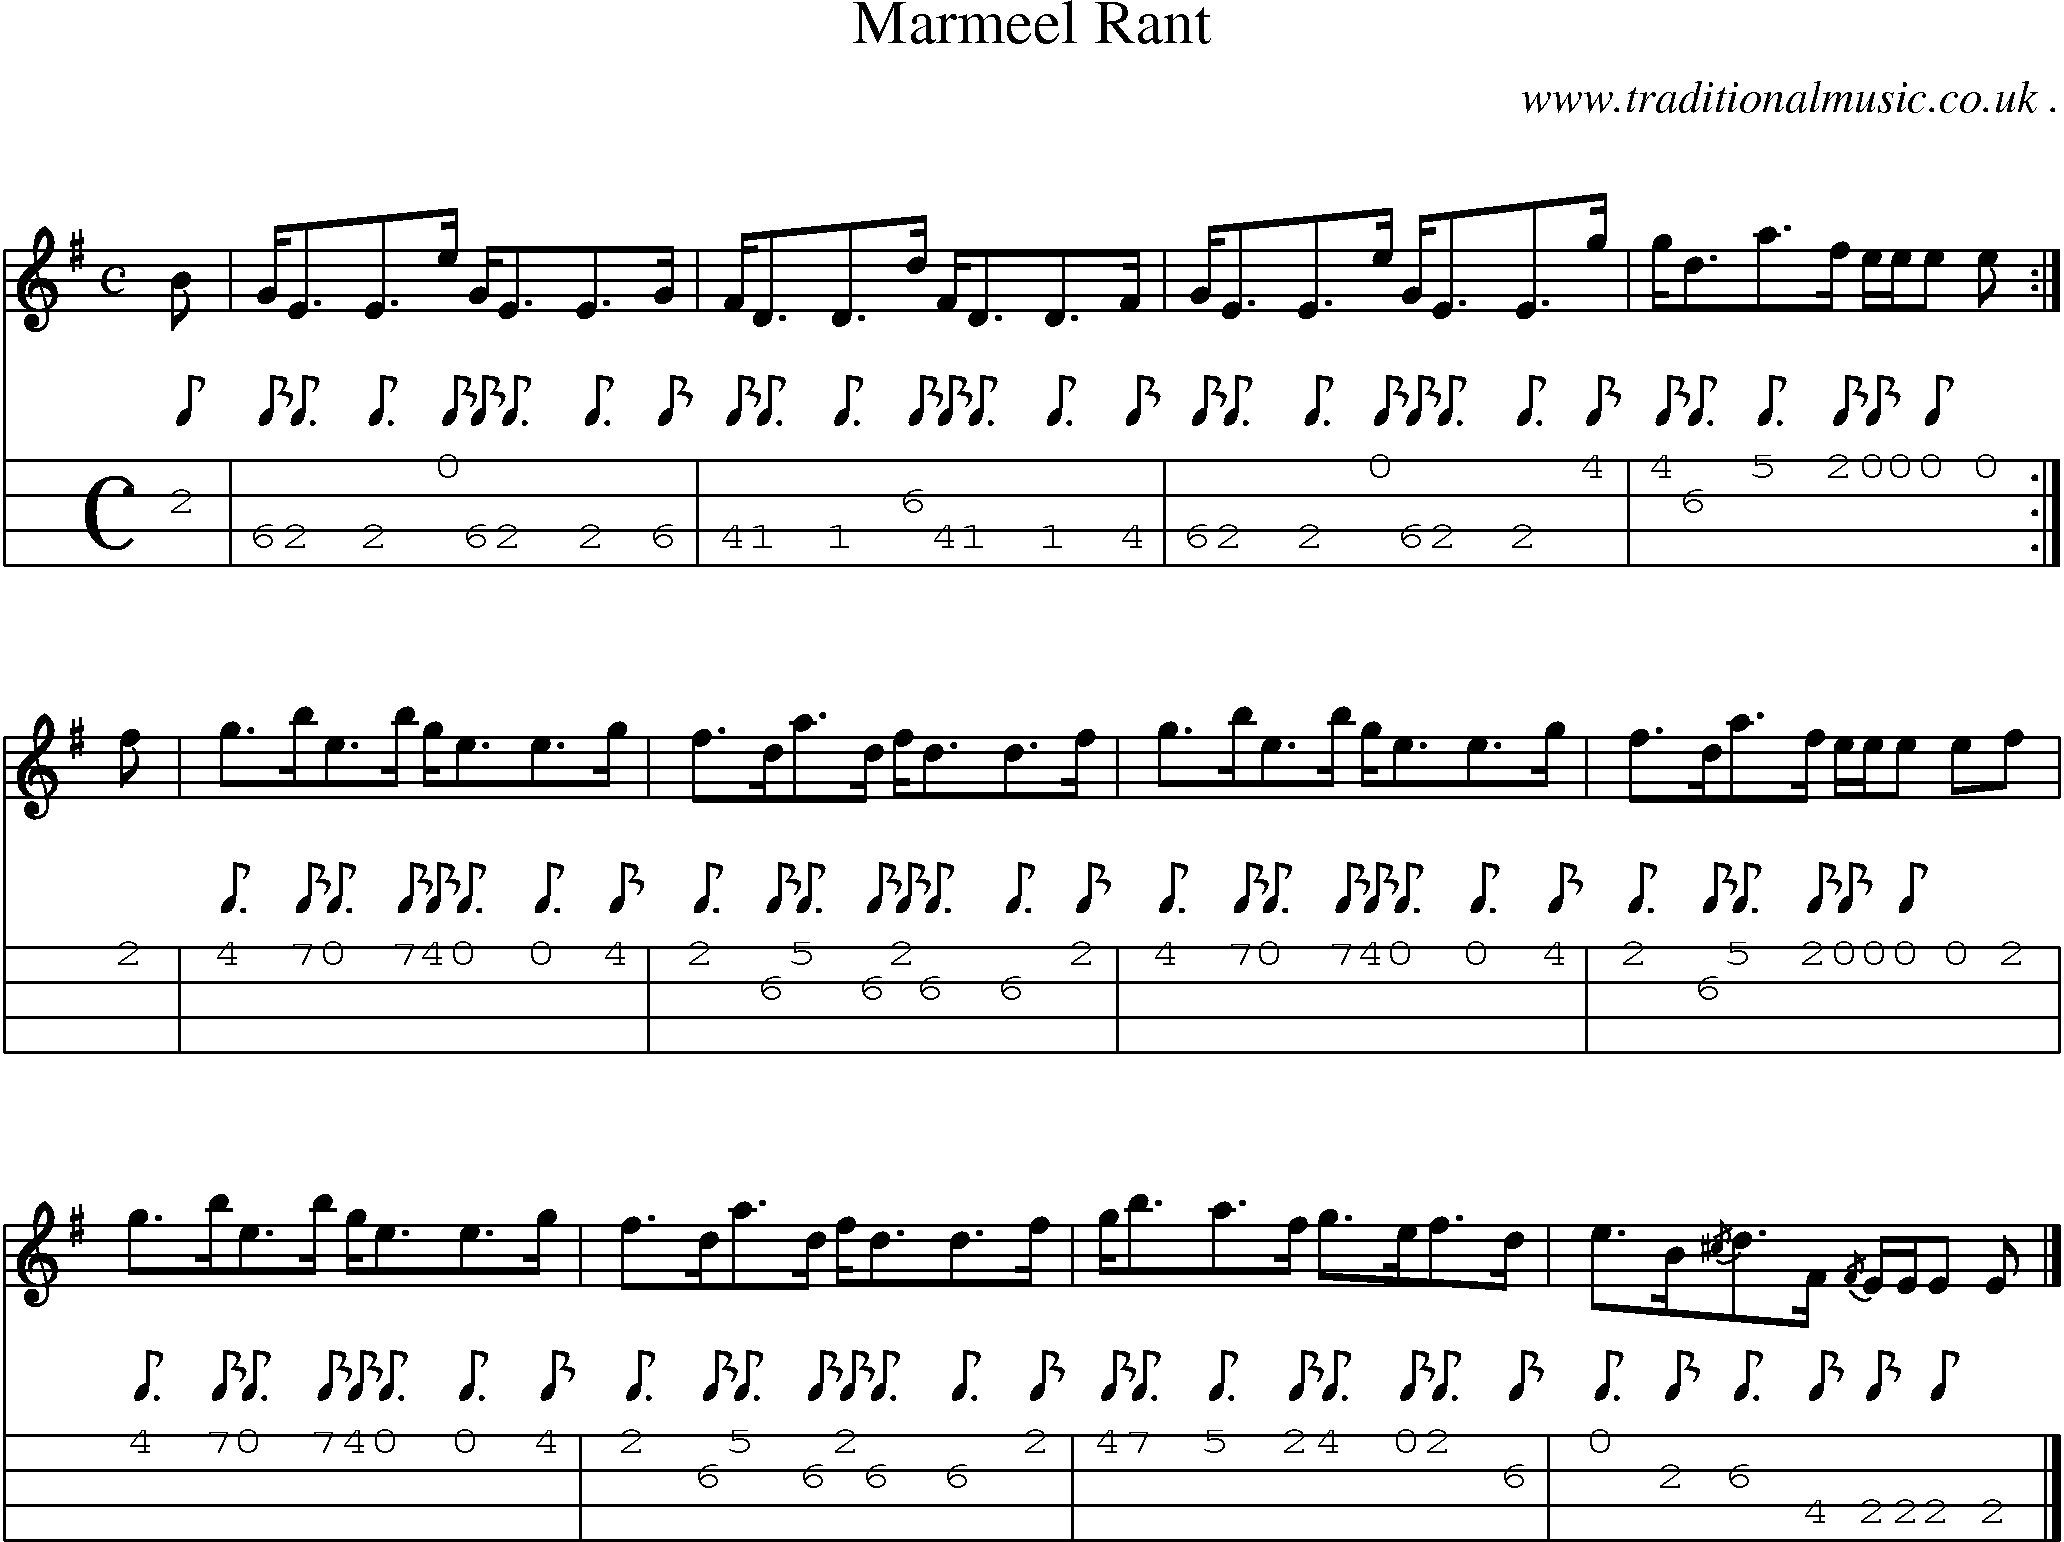 Sheet-music  score, Chords and Mandolin Tabs for Marmeel Rant